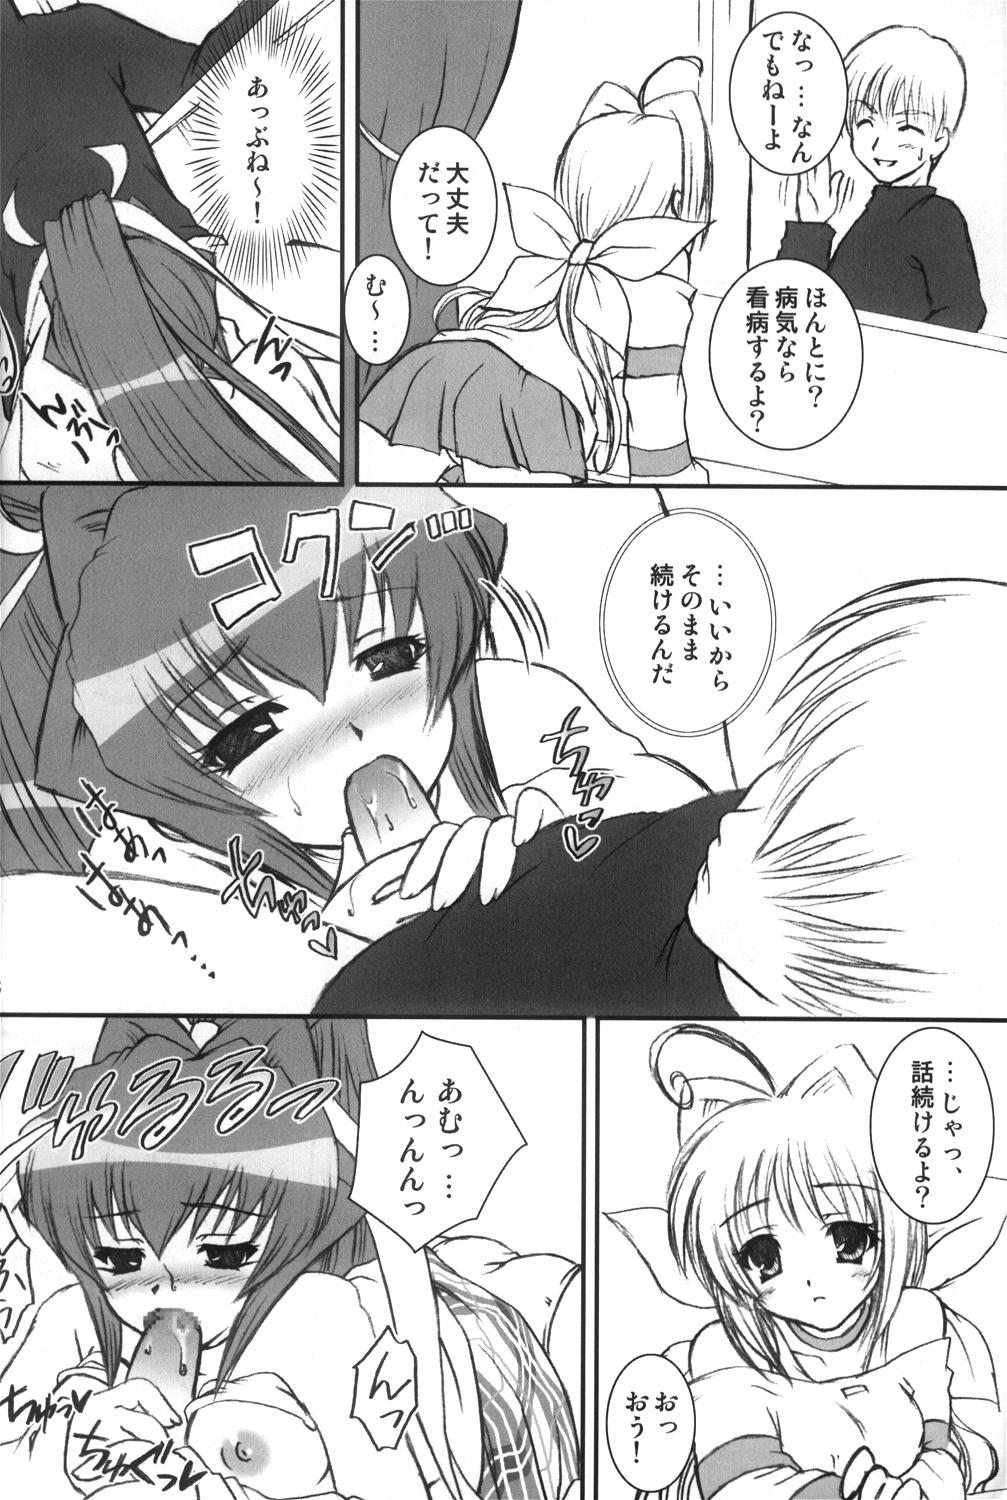 Old Young I have fallen in love with you... - Muv-luv Casero - Page 7